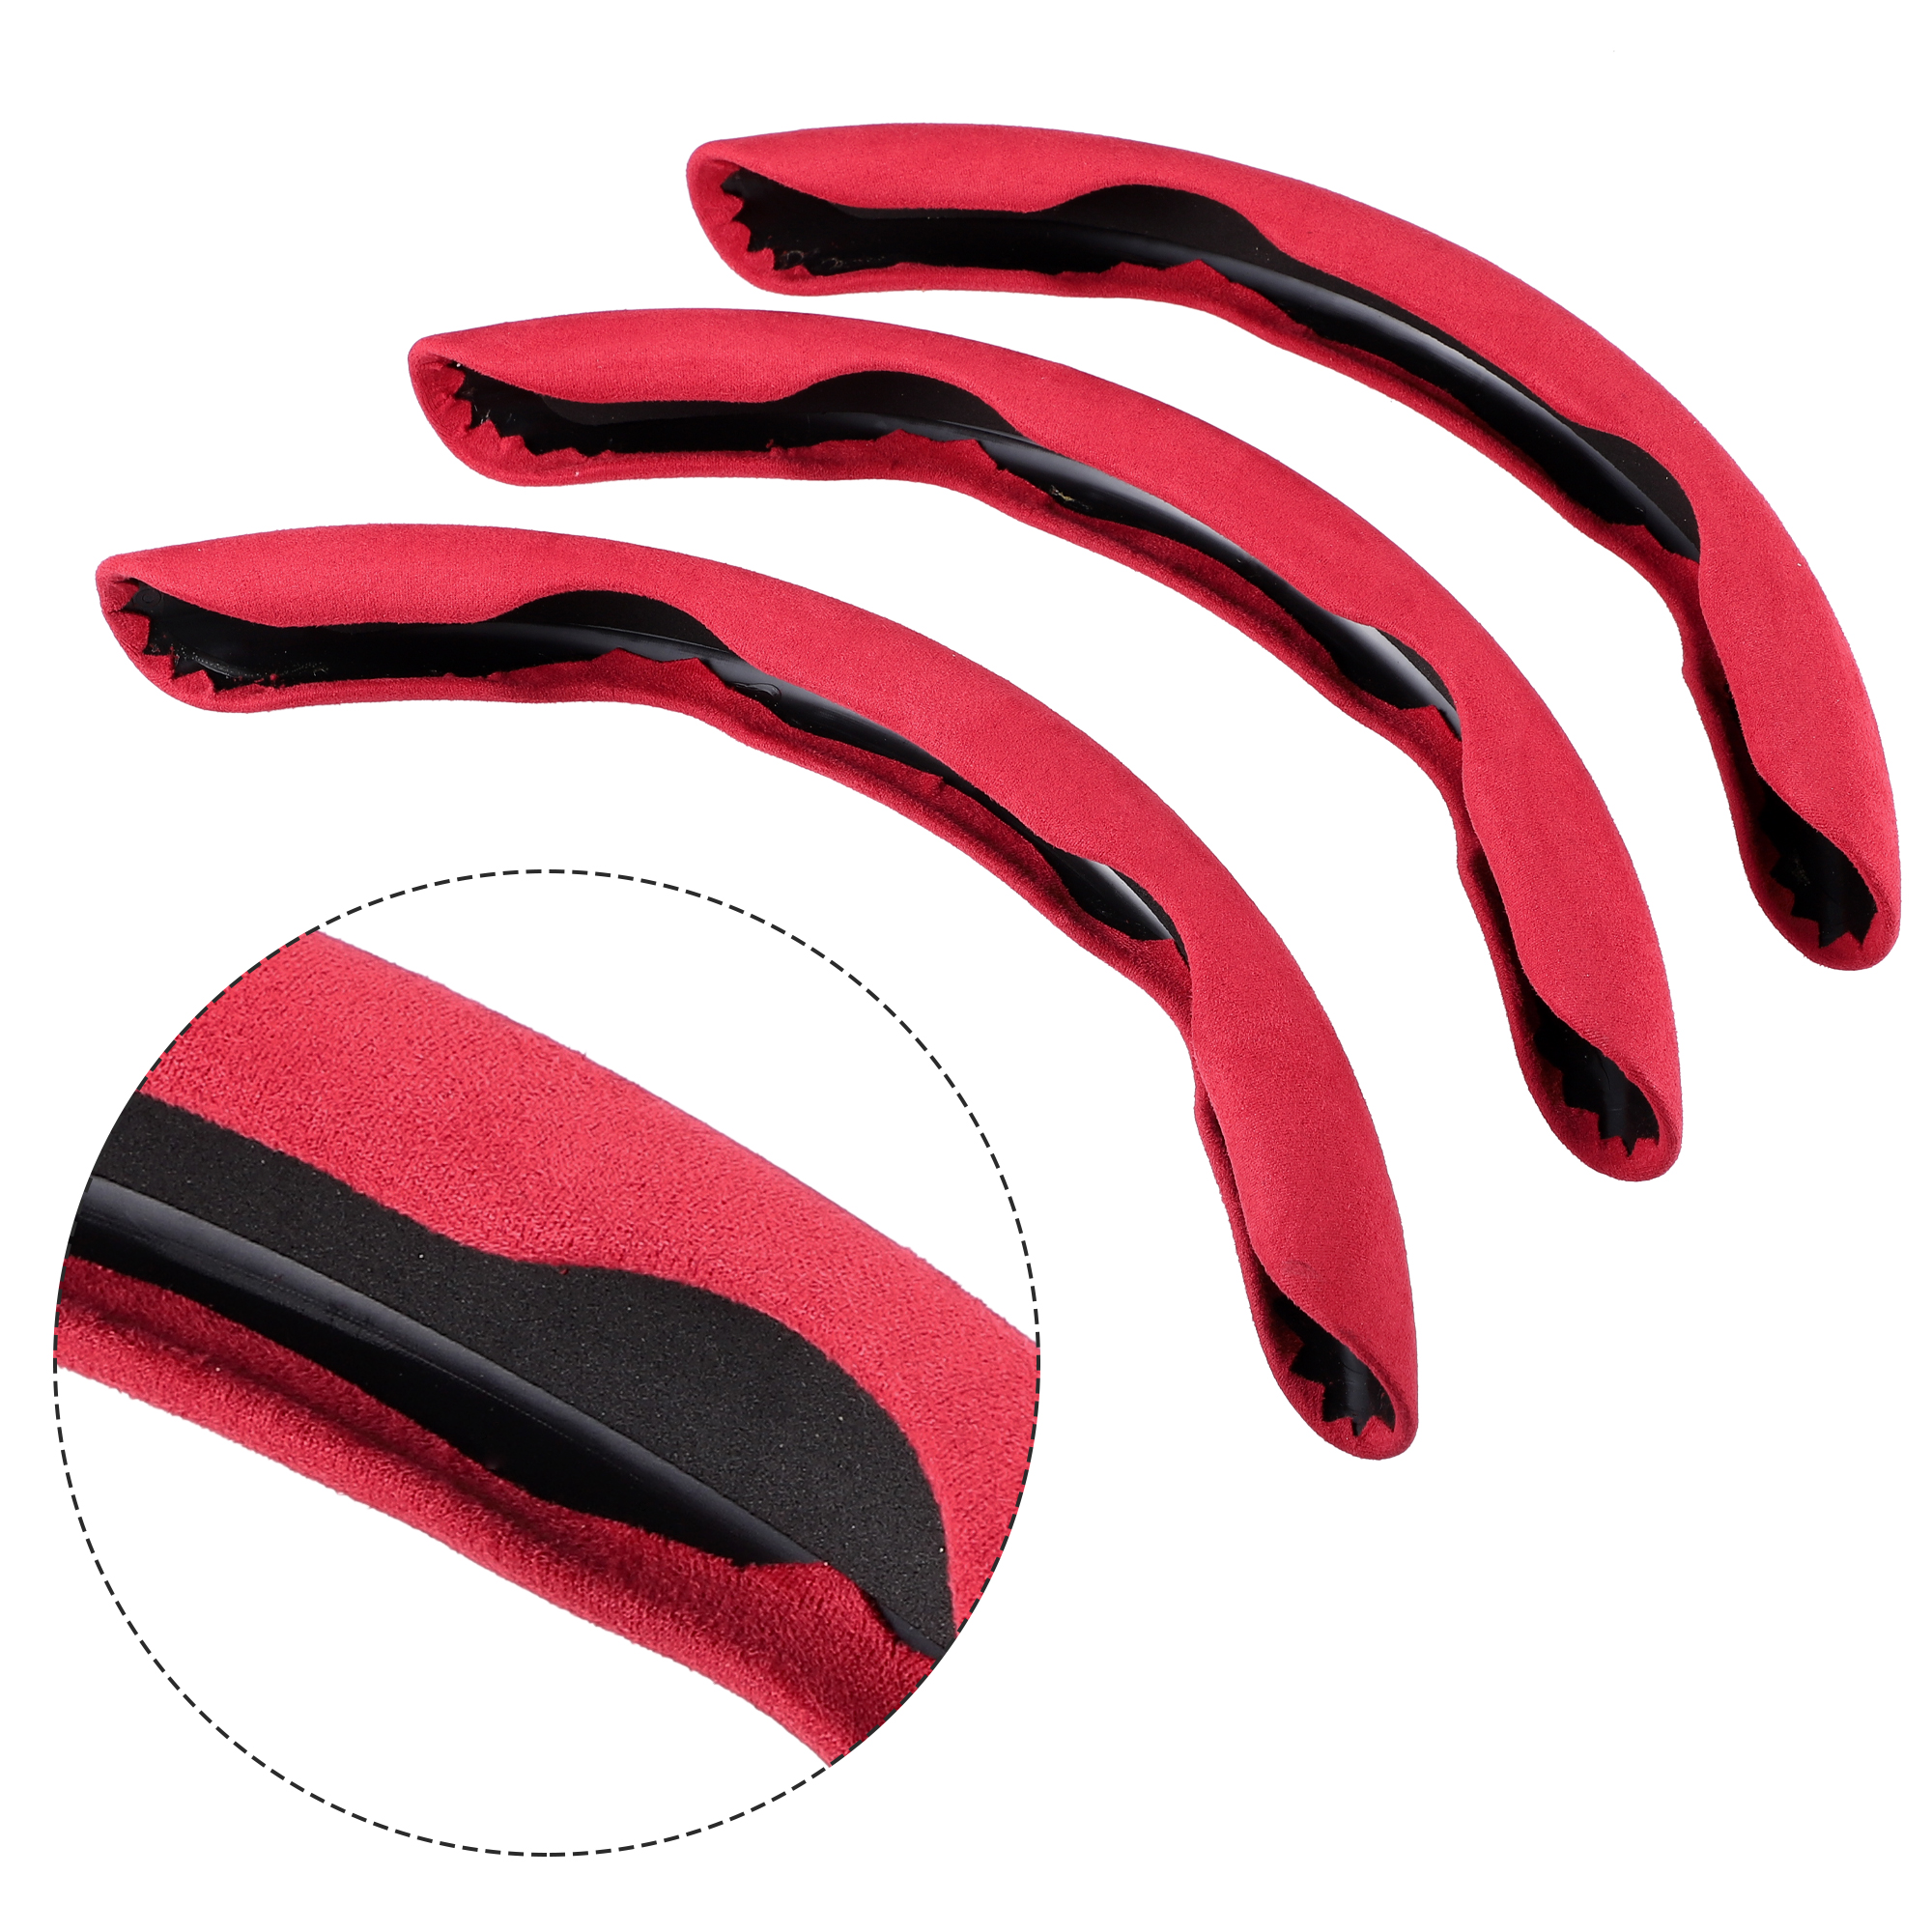 Unique Bargains 3pcs Segmented 14.5-15 Inch Universal for Car Steering Wheel Cover Suede Red